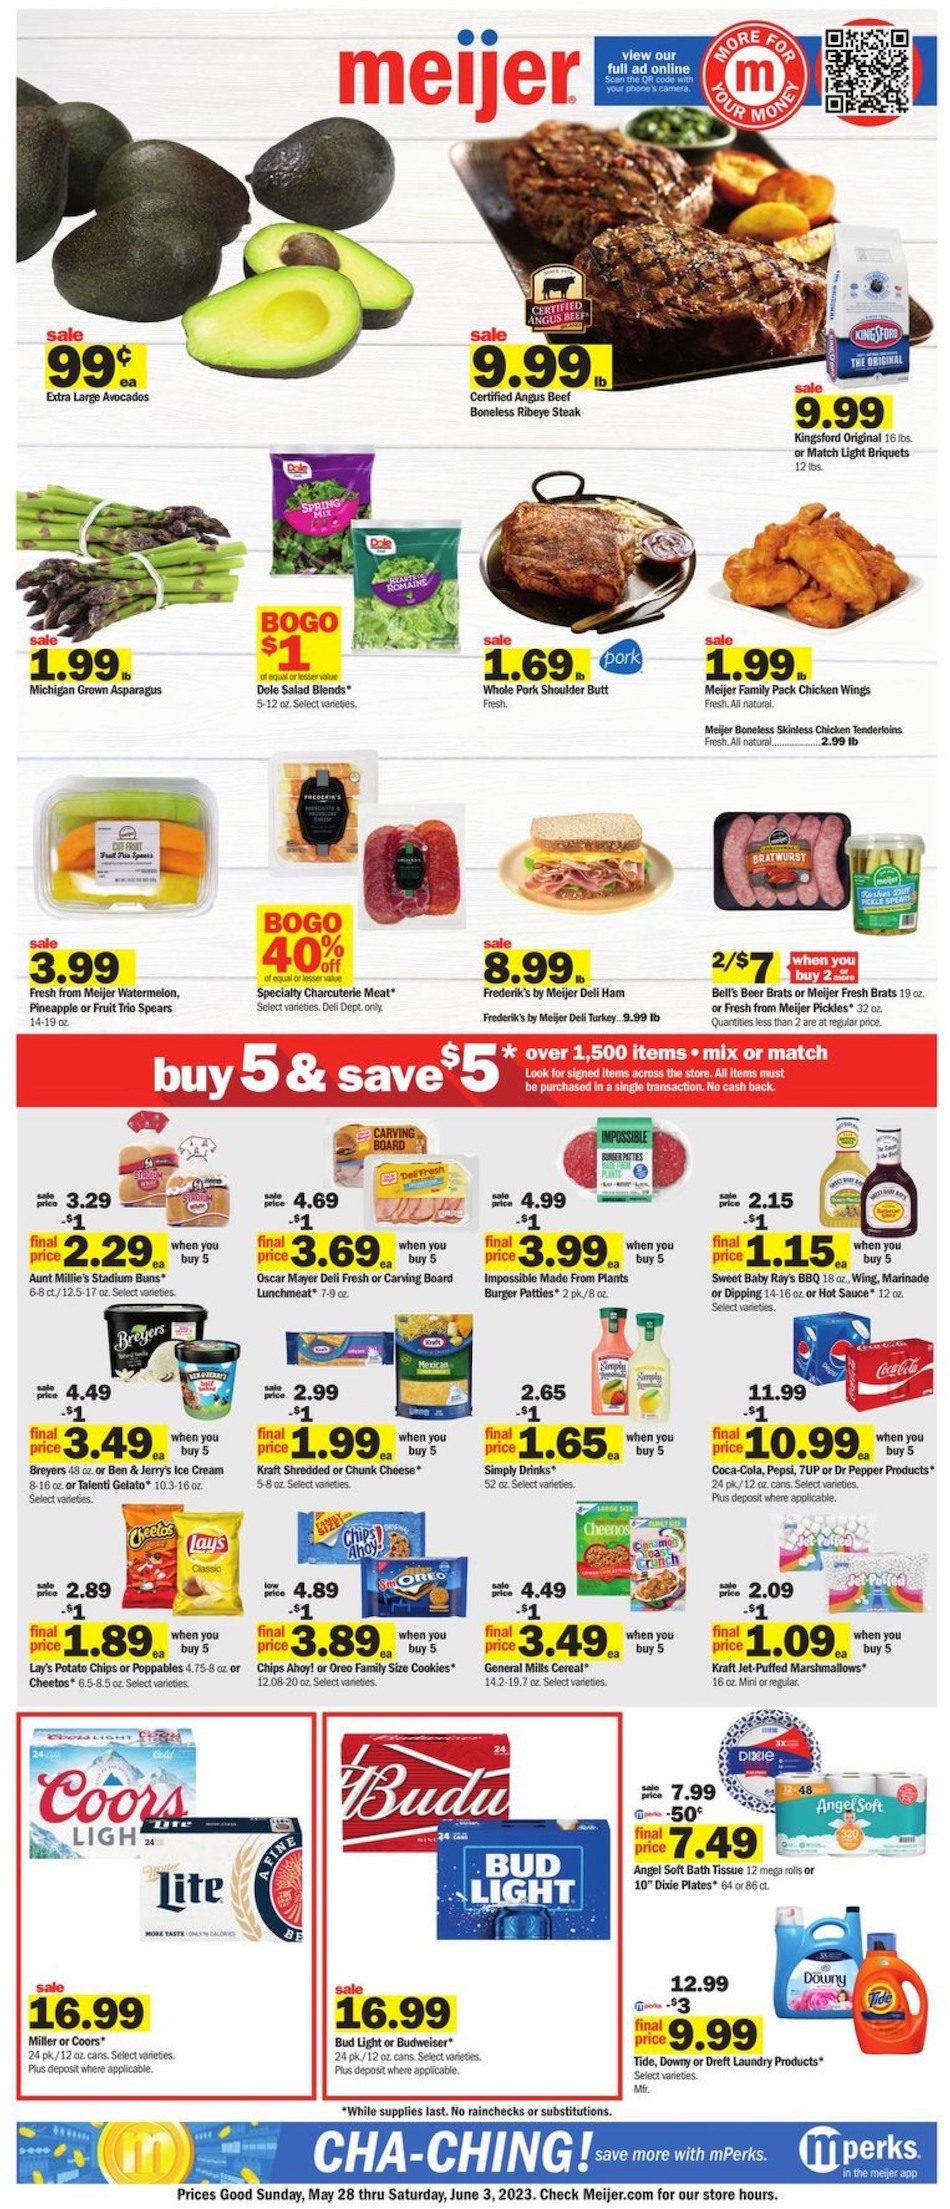 Meijer Weekly Ad May 28th May – 3rd June 2023 Page 1